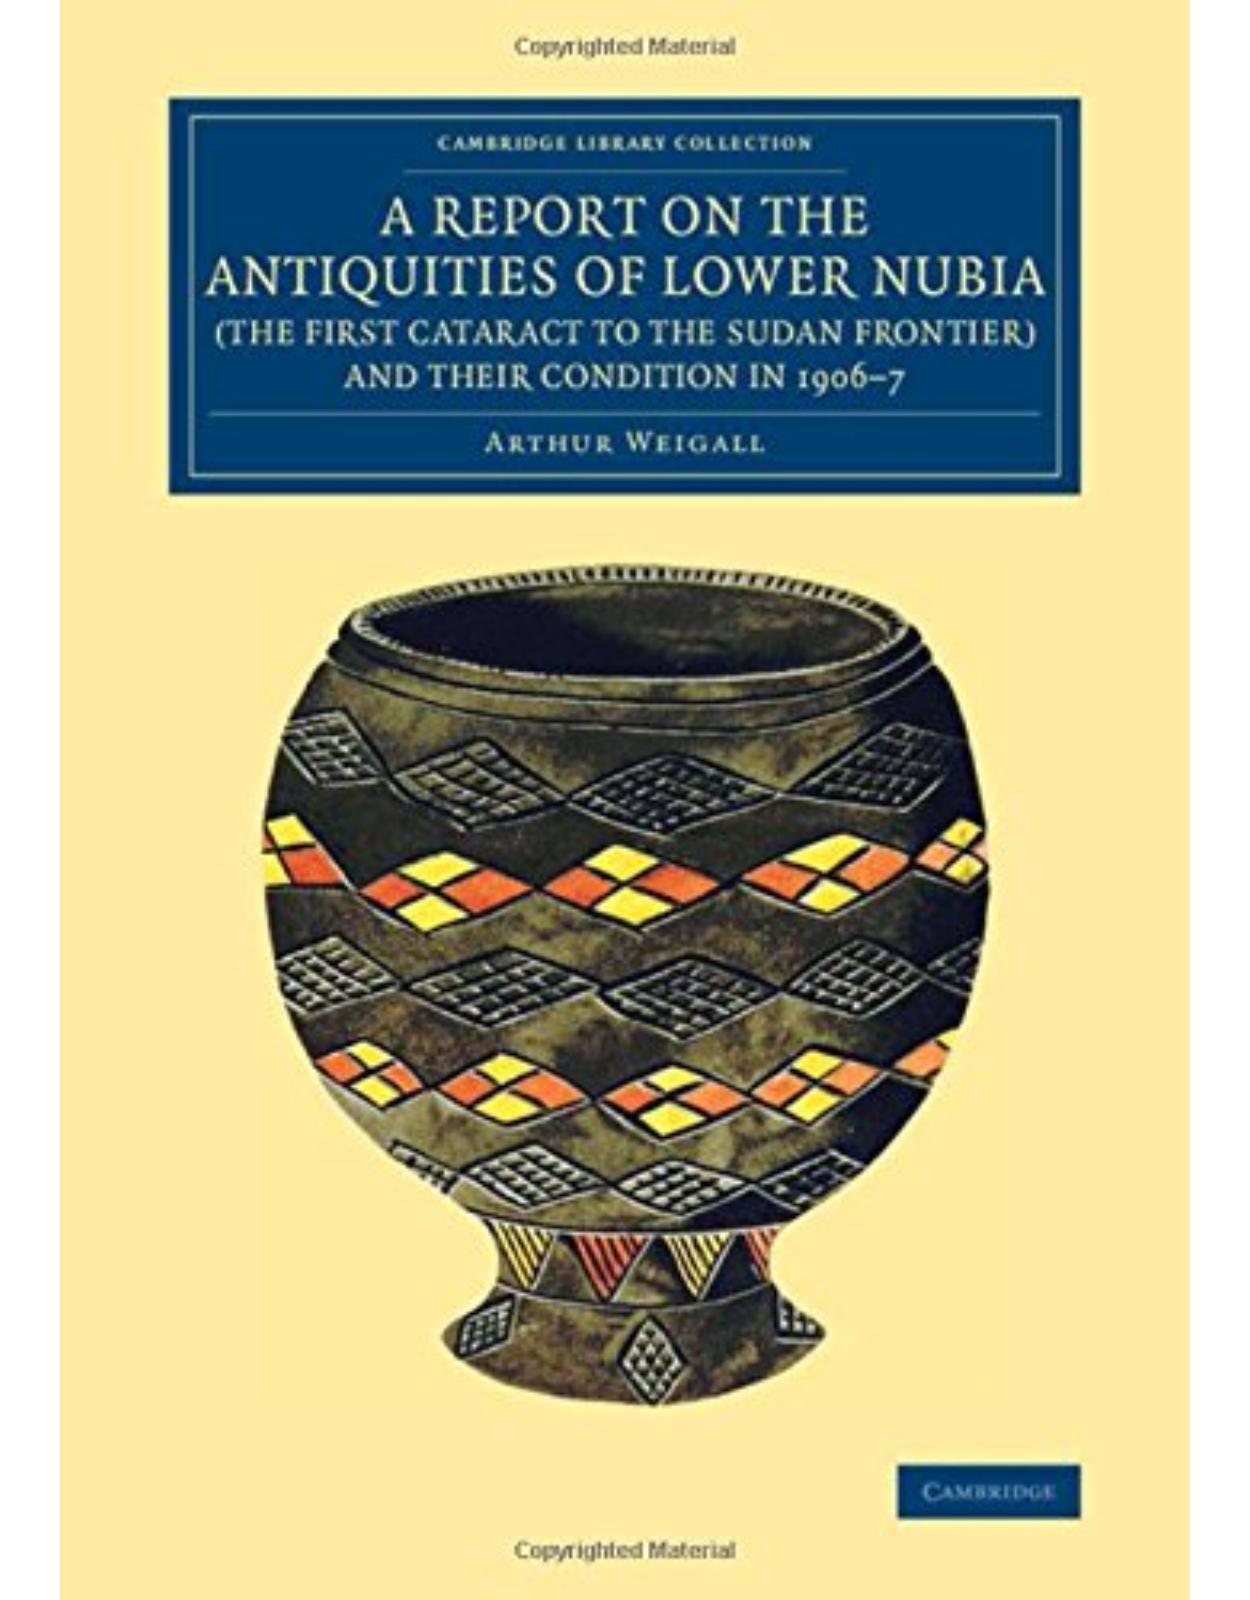 A Report on the Antiquities of Lower Nubia (the First Cataract to the Sudan Frontier) and their Condition in 1906-7 (Cambridge Library Collection - Egyptology)